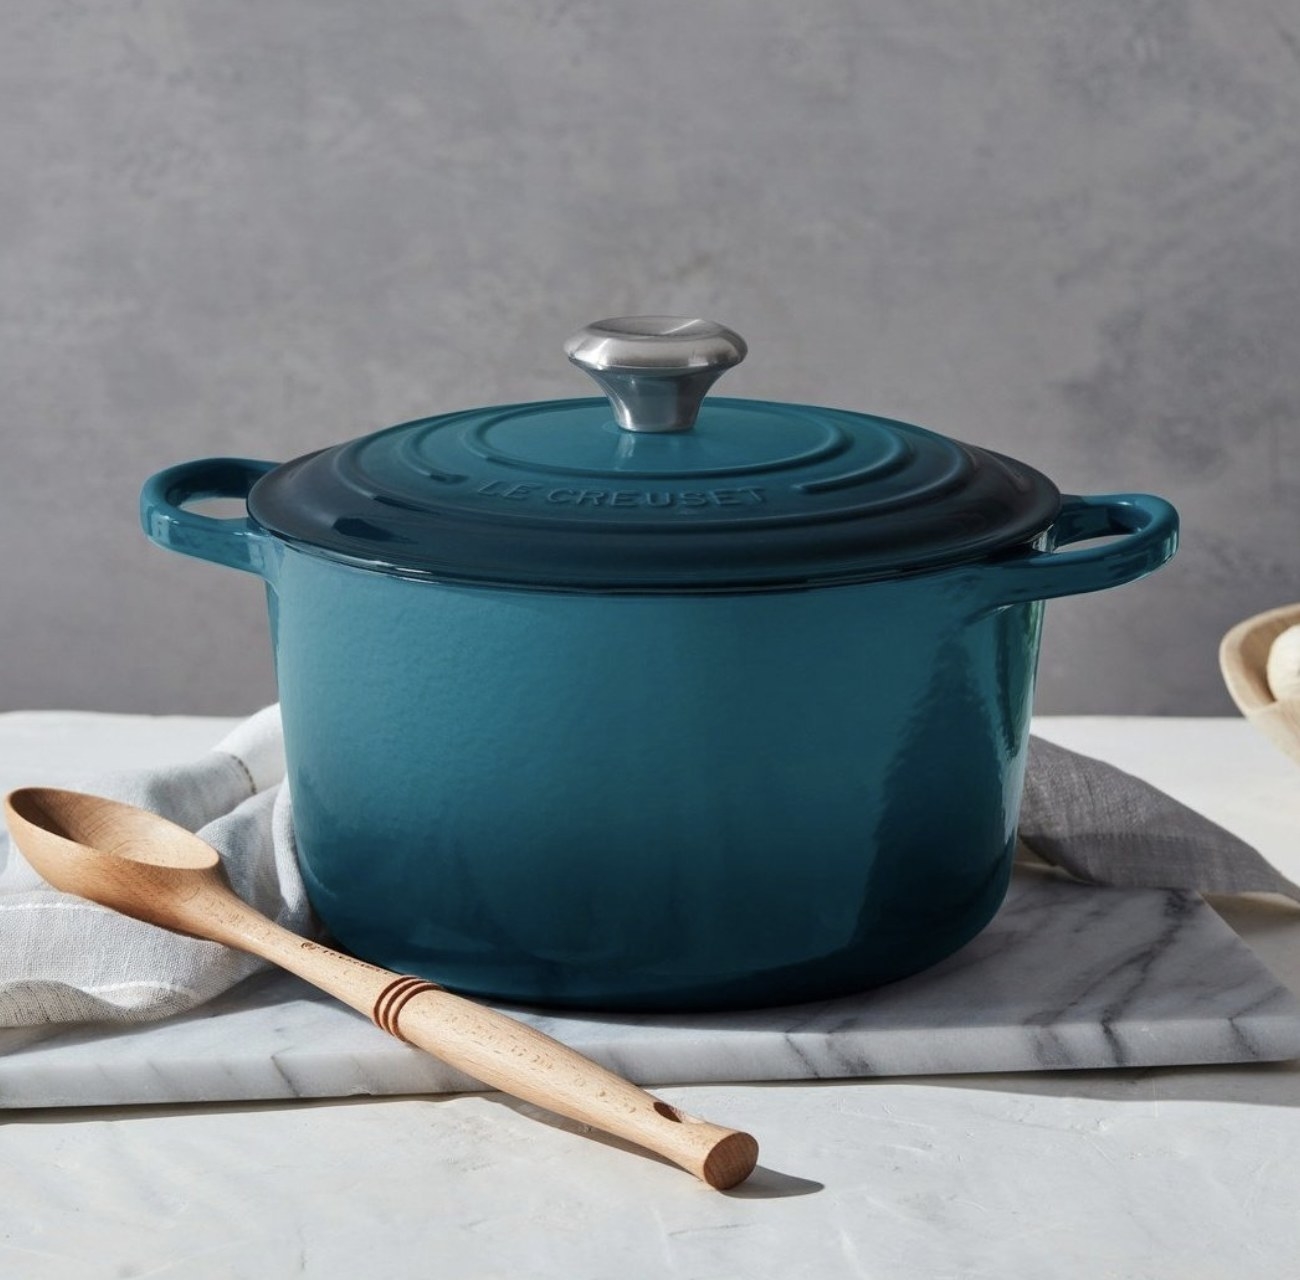 The blue dutch oven sitting on kitchen countertop